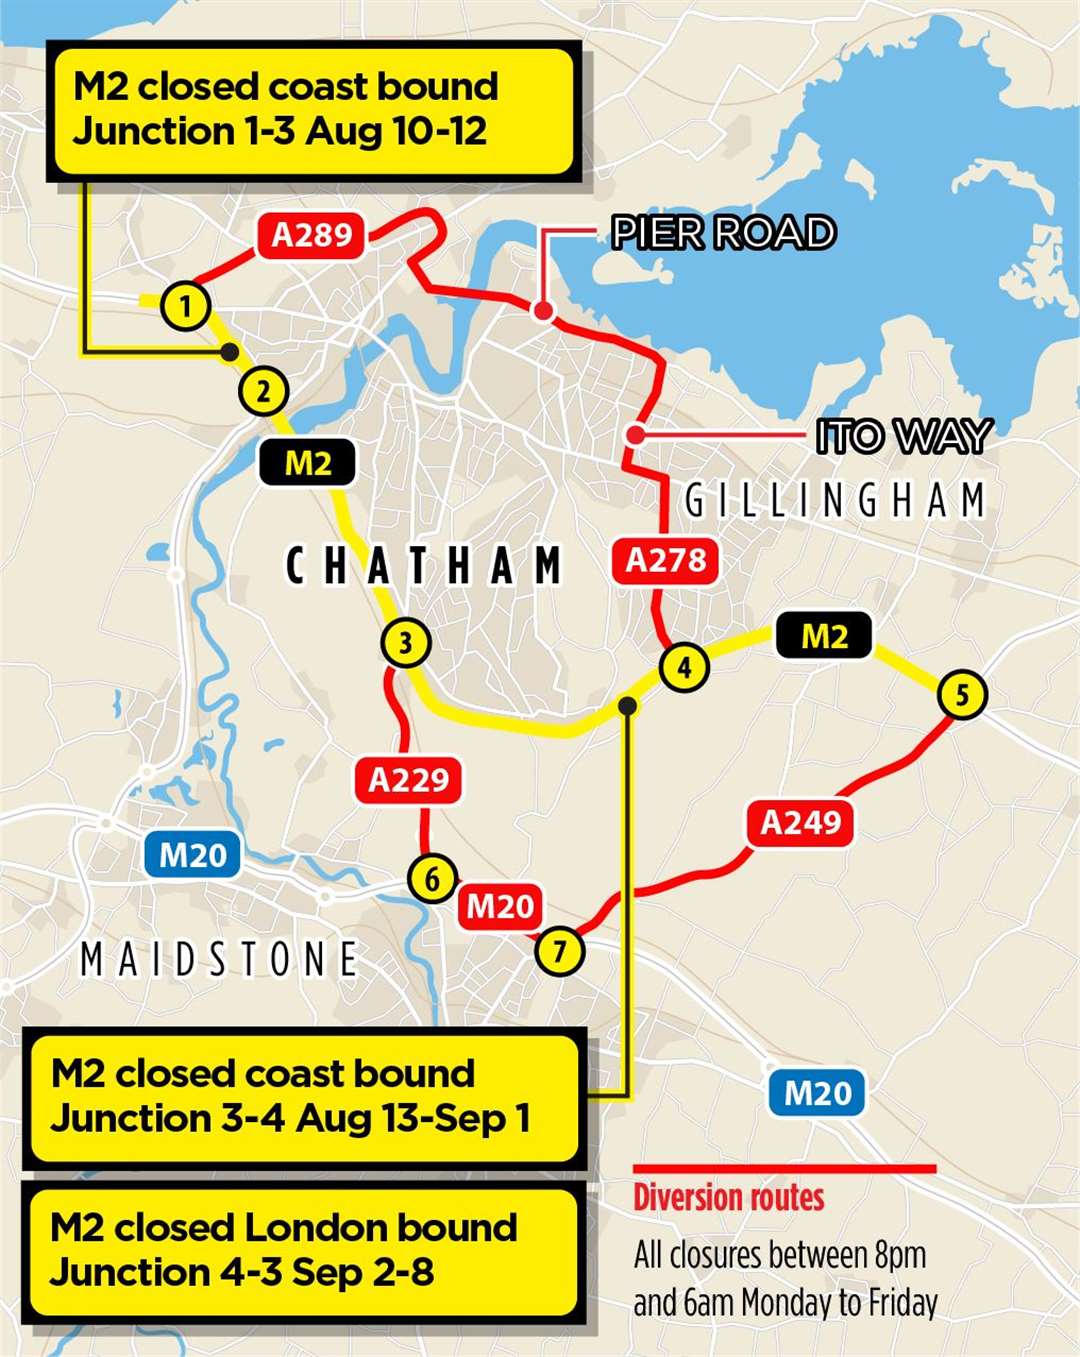 M2 closures and the diversions in place from August 10